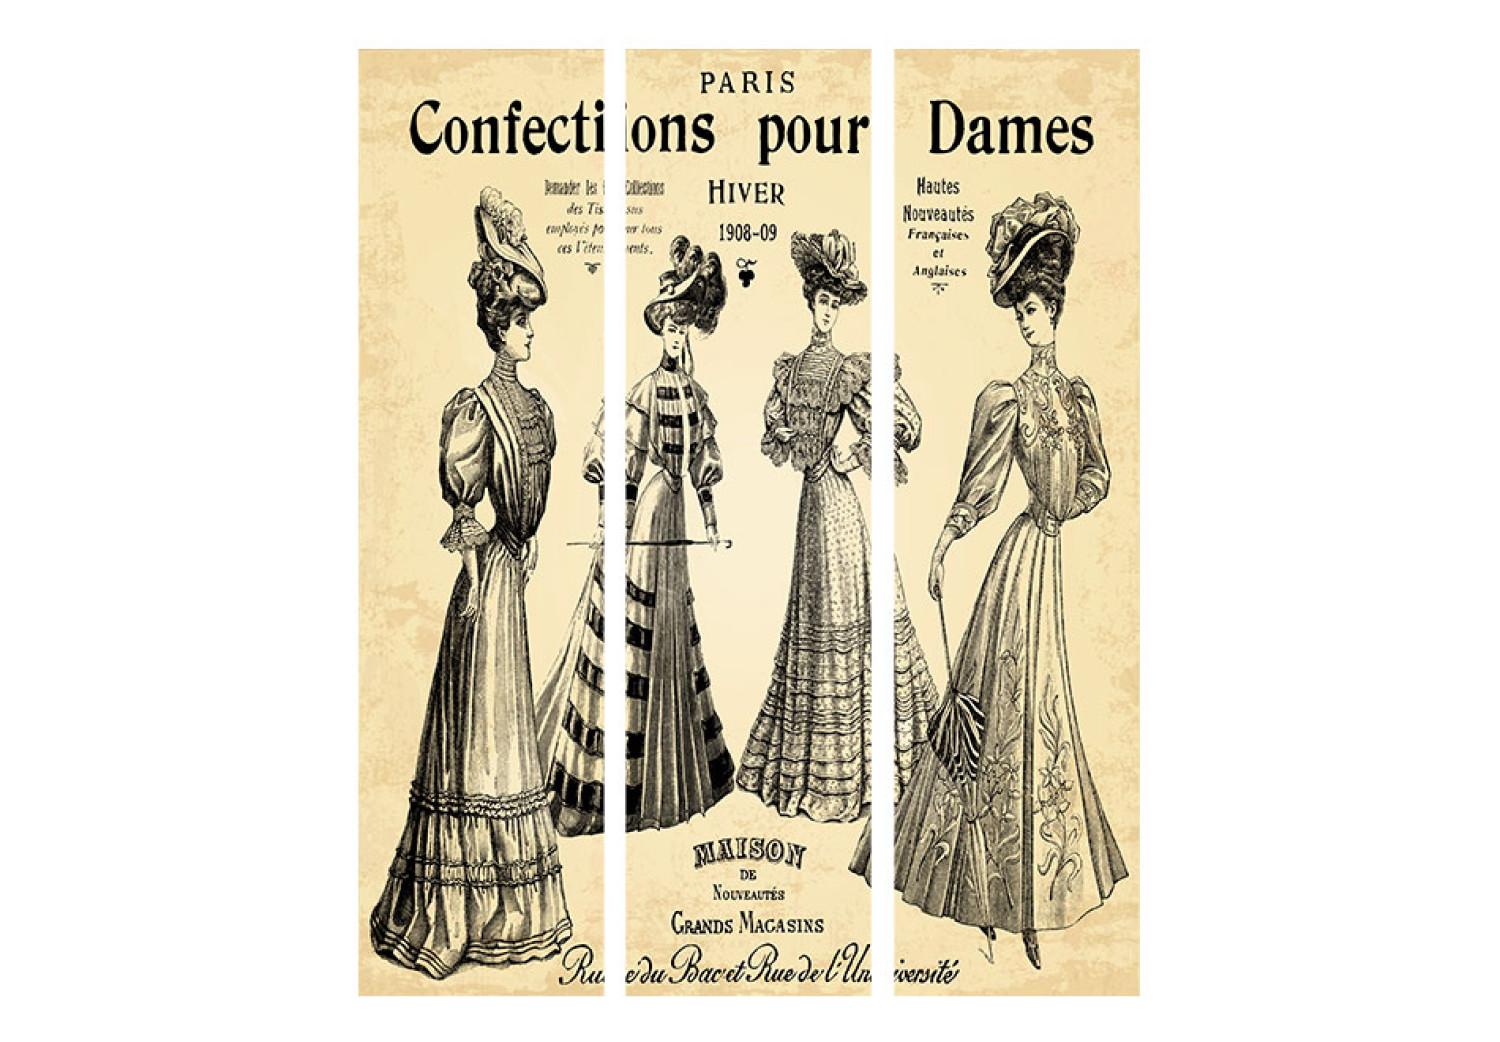 Biombo Confections pour Dames [Room Dividers]